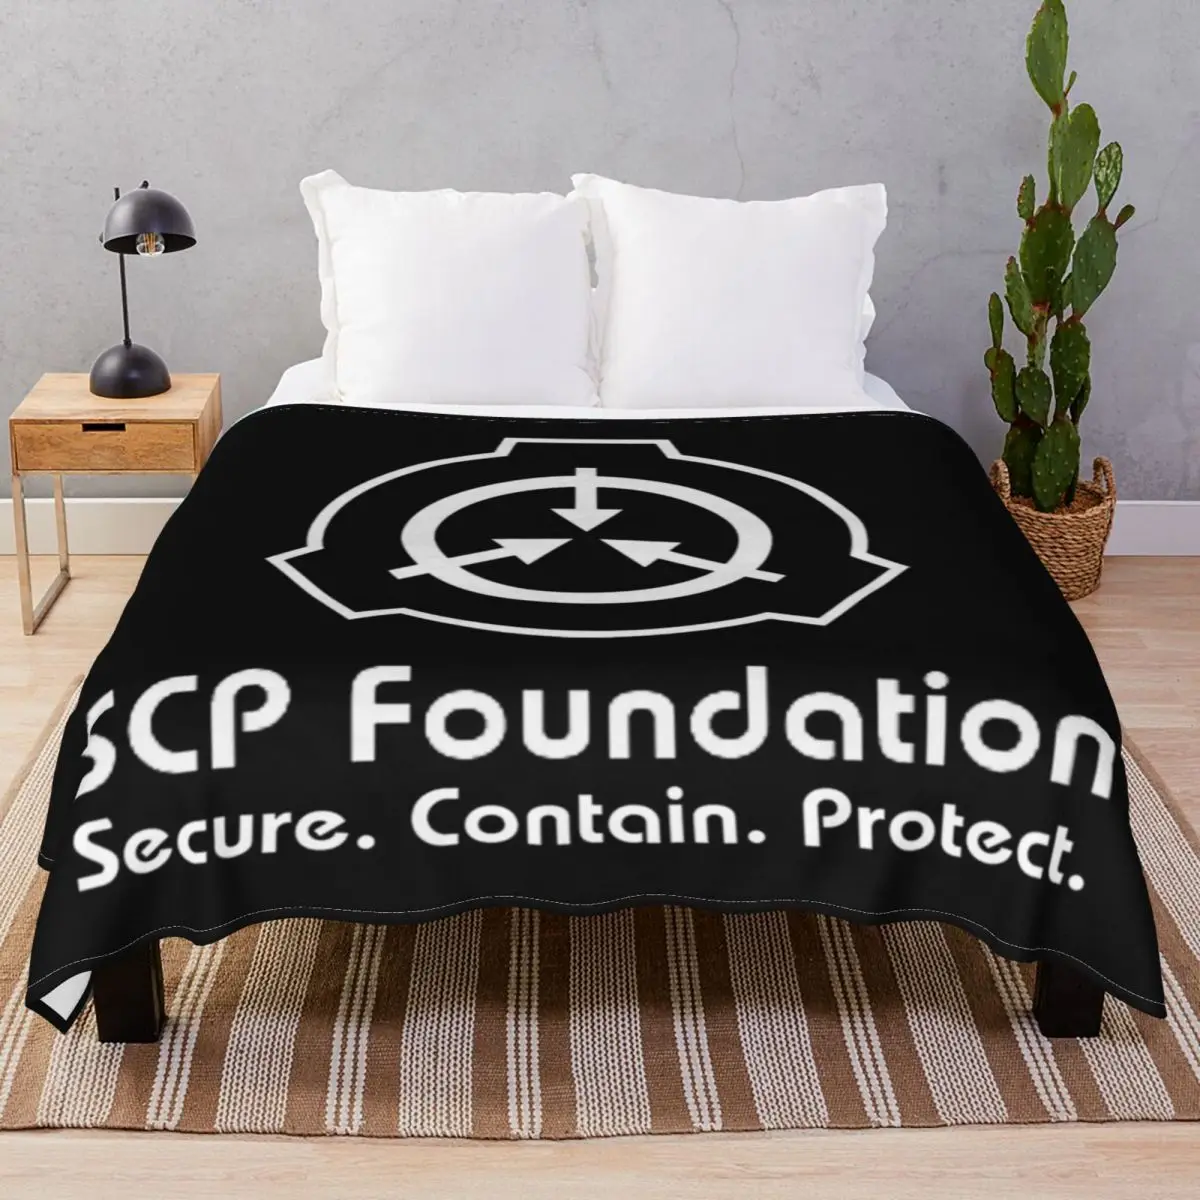 SCP Secure Contain Protect Black Blanket Flannel Textile Decor Ultra-Soft Throw Blankets for Bedding Home Couch Travel Cinema